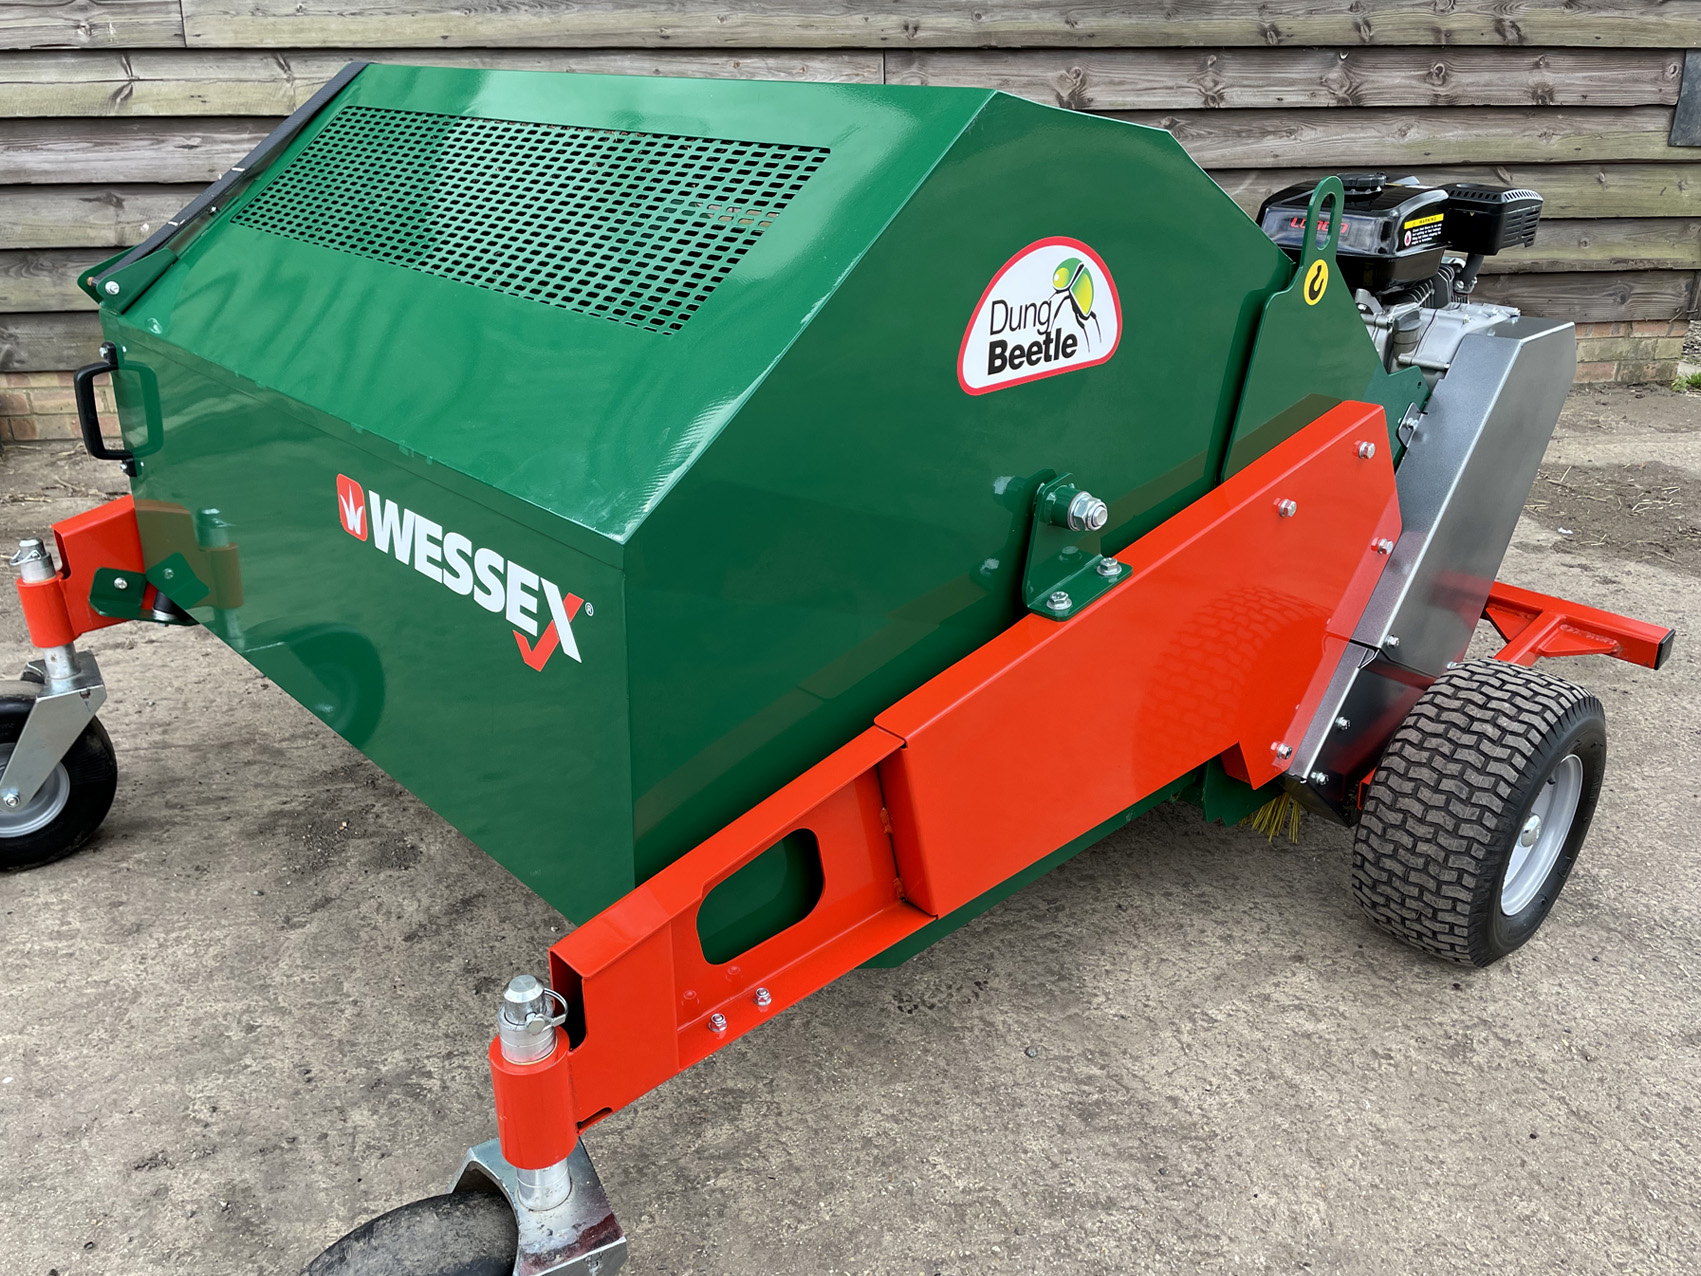 Wessex Dung Beetle Paddock Cleaner Sweeper - Axle Quads